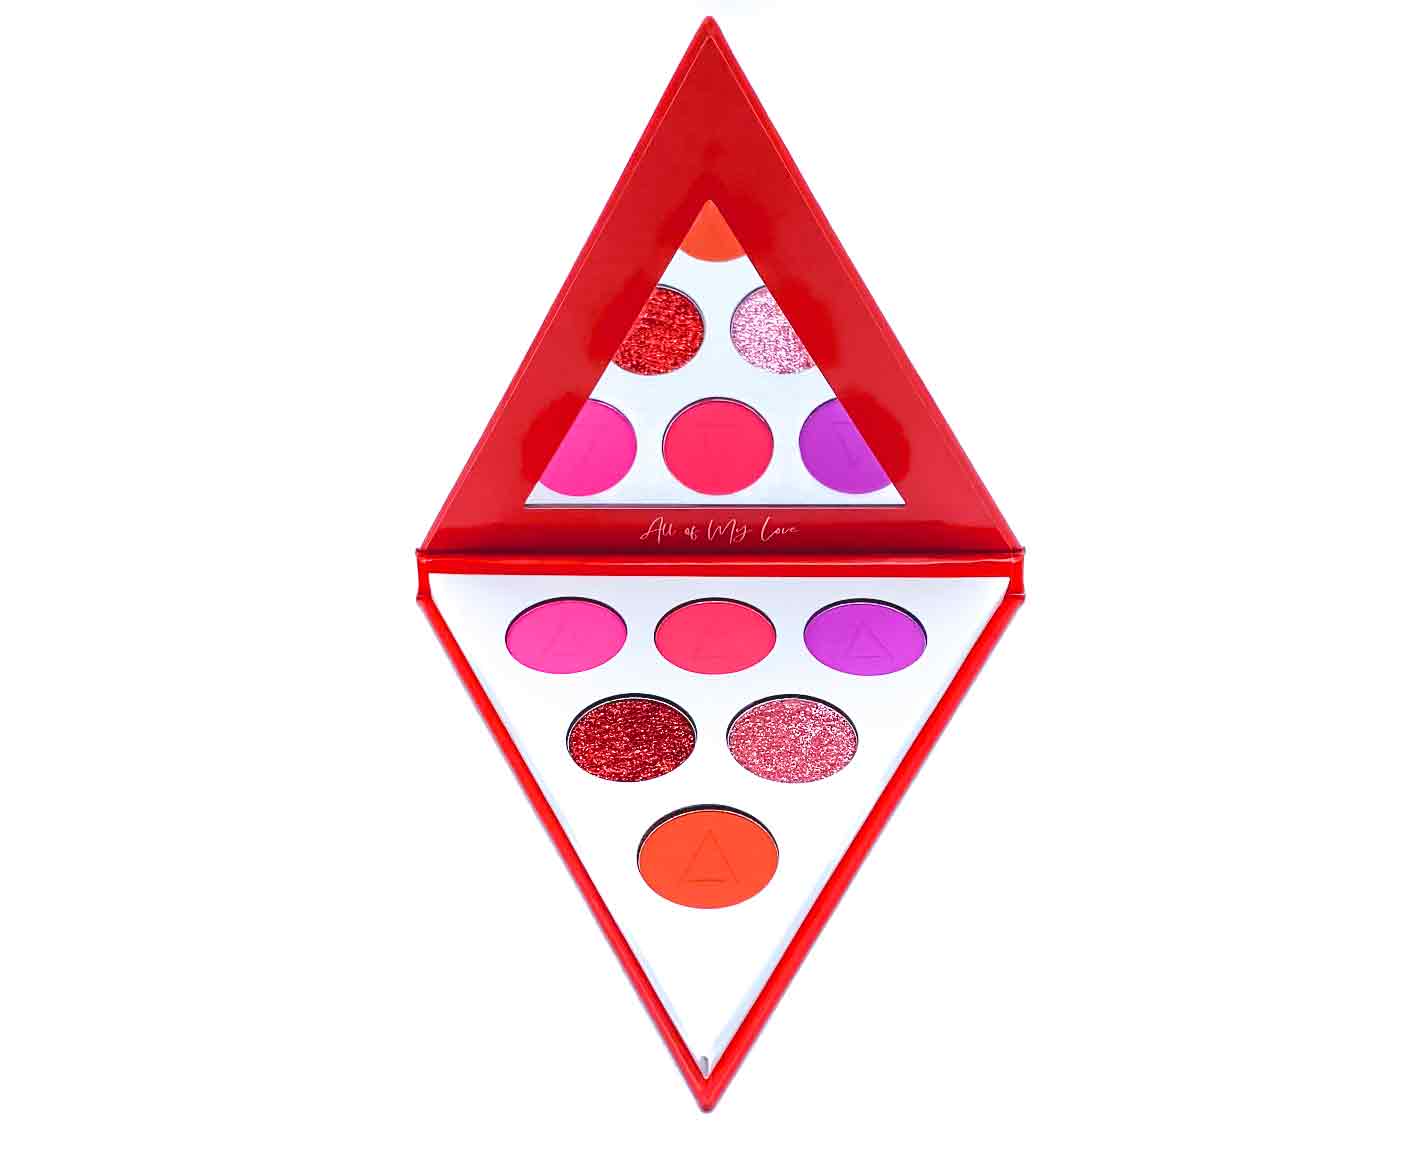 Delta Sigma Theta Sorority branded Eyeshadow Palette. 6 velvety warm berry tones that are blendable with your fingers.  Suitable for all skintownes